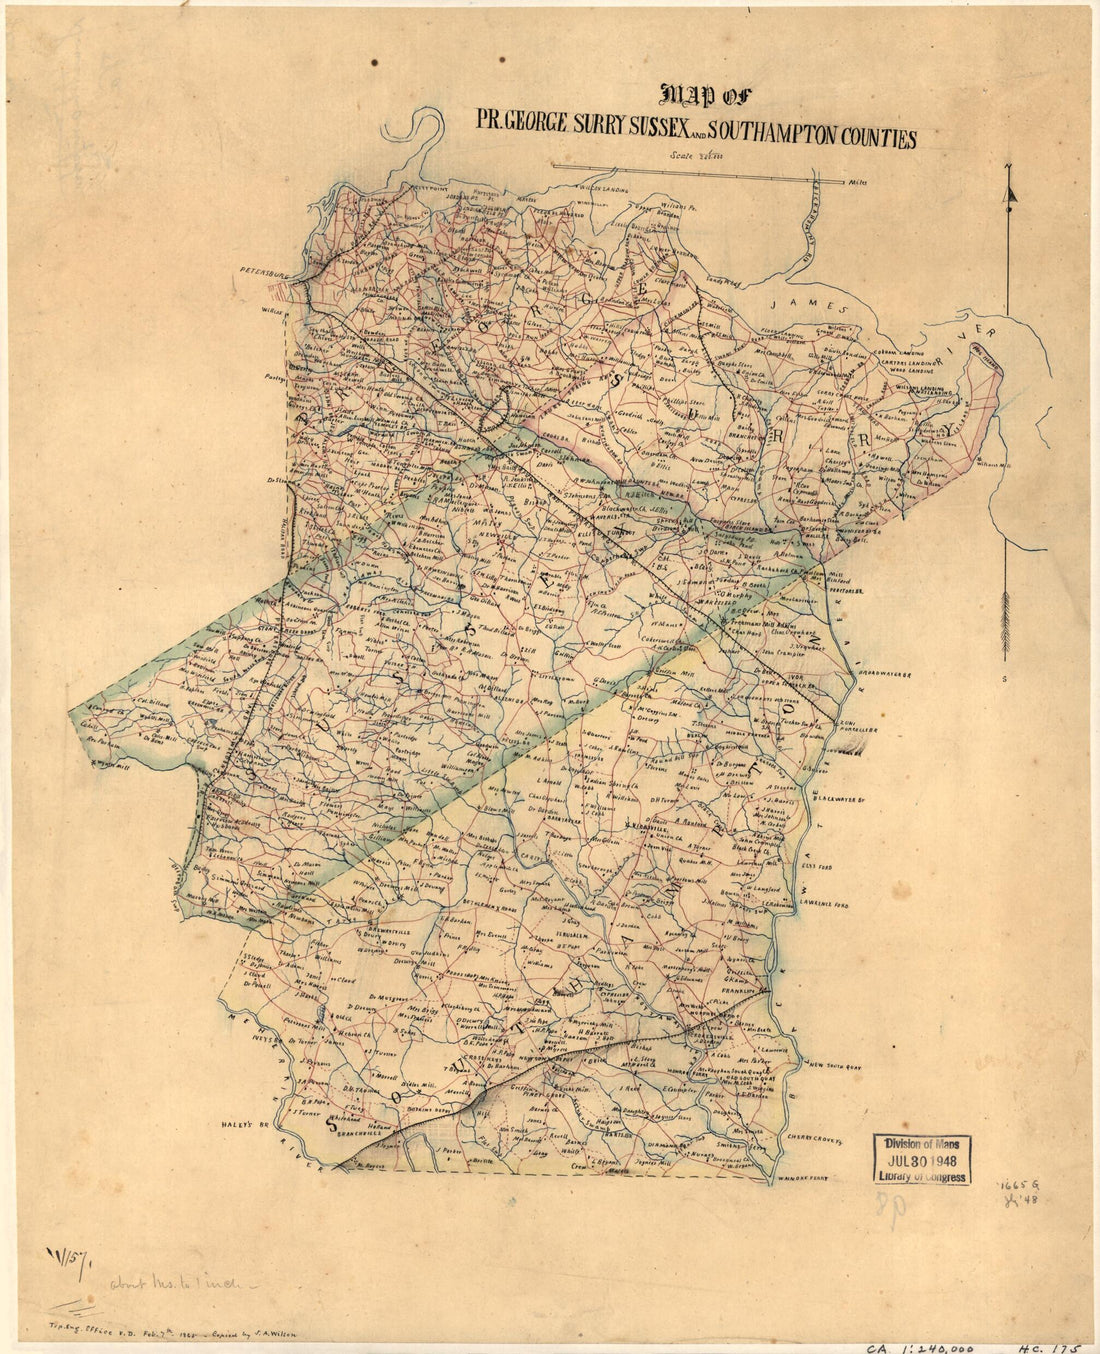 This old map of Map of Pr. George, Surry, Sussex, and Southampton Counties (Map of Prince George, Surry, Sussex, and Southampton Counties) from 1865 was created by J. A. Wilson in 1865